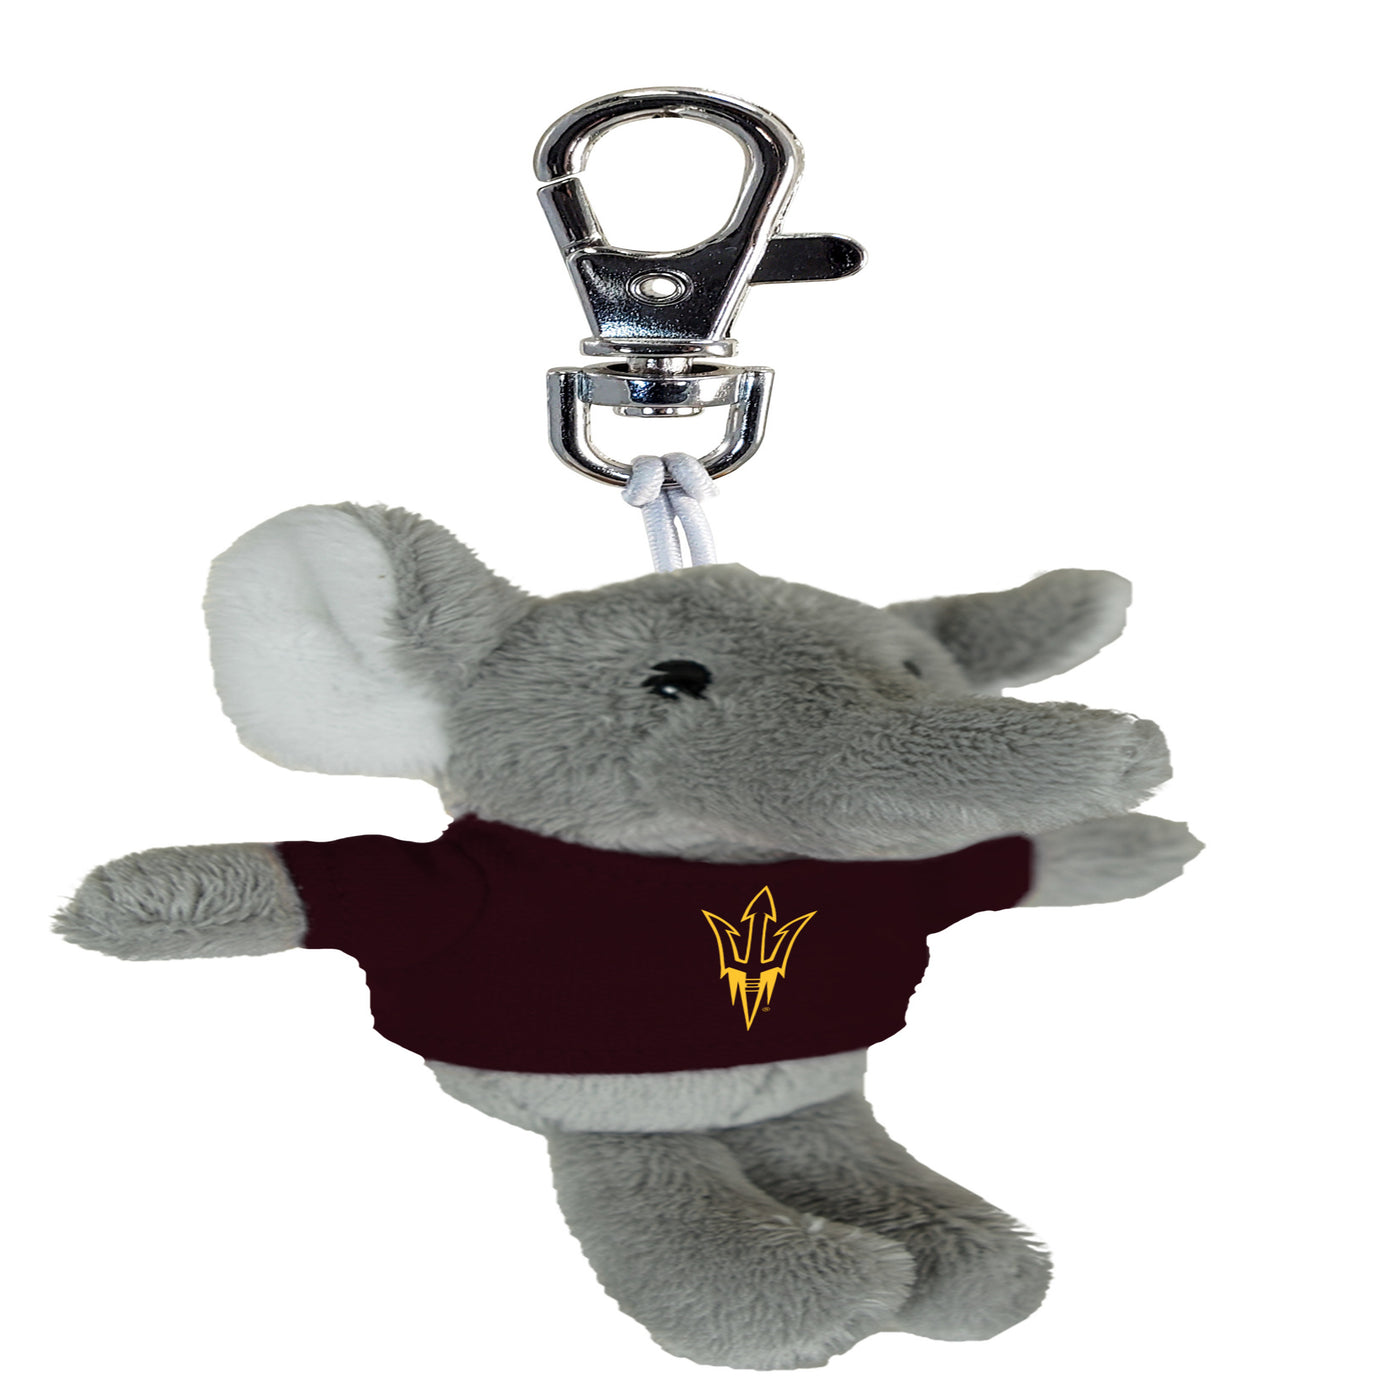 ASU Small stuffed grey elephant on a keychain. The Elephant is wearing a maroon shirt with the gold pitchfork logo . 